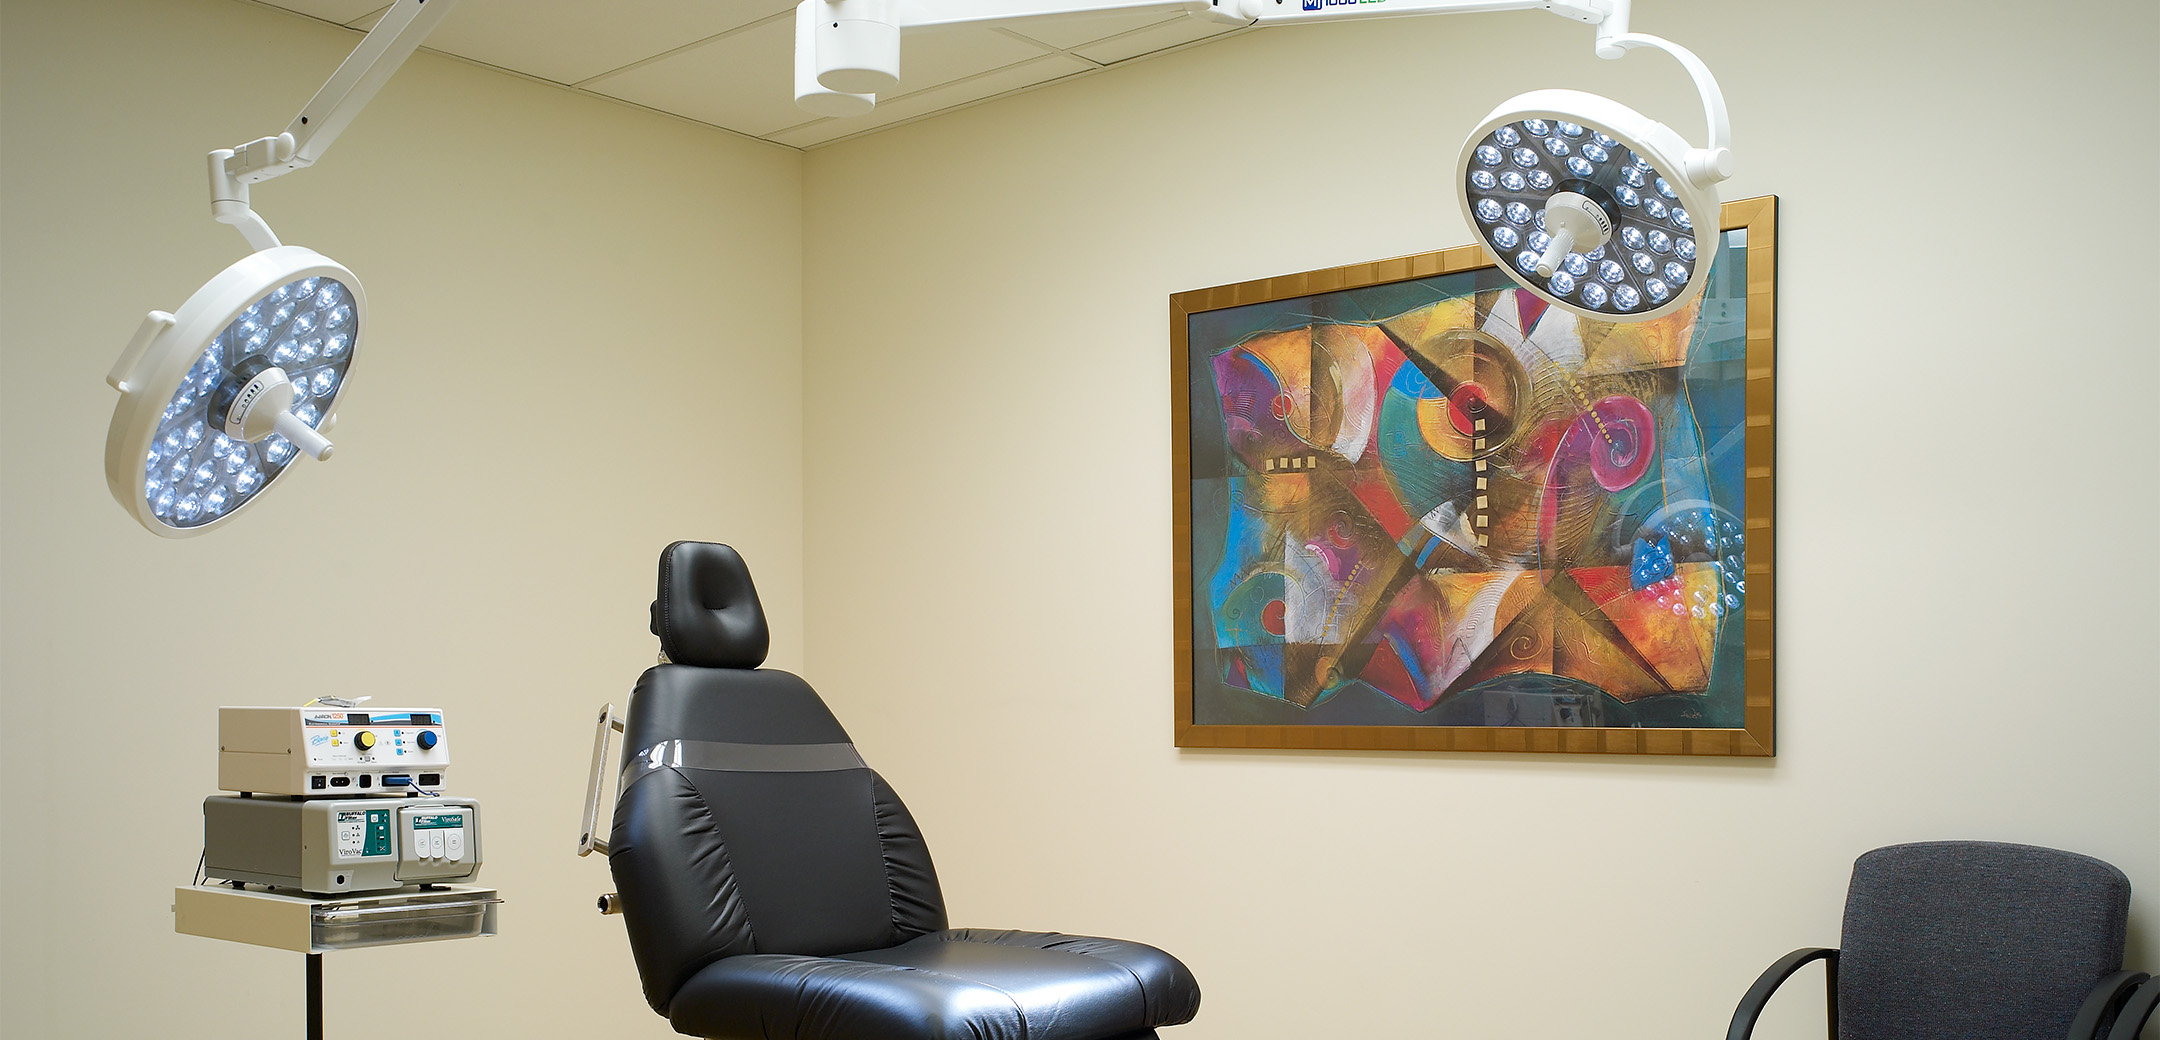 A close up interior view of the Crozer Keystone patient examination labs showcasing the adjustable seat and equipment.